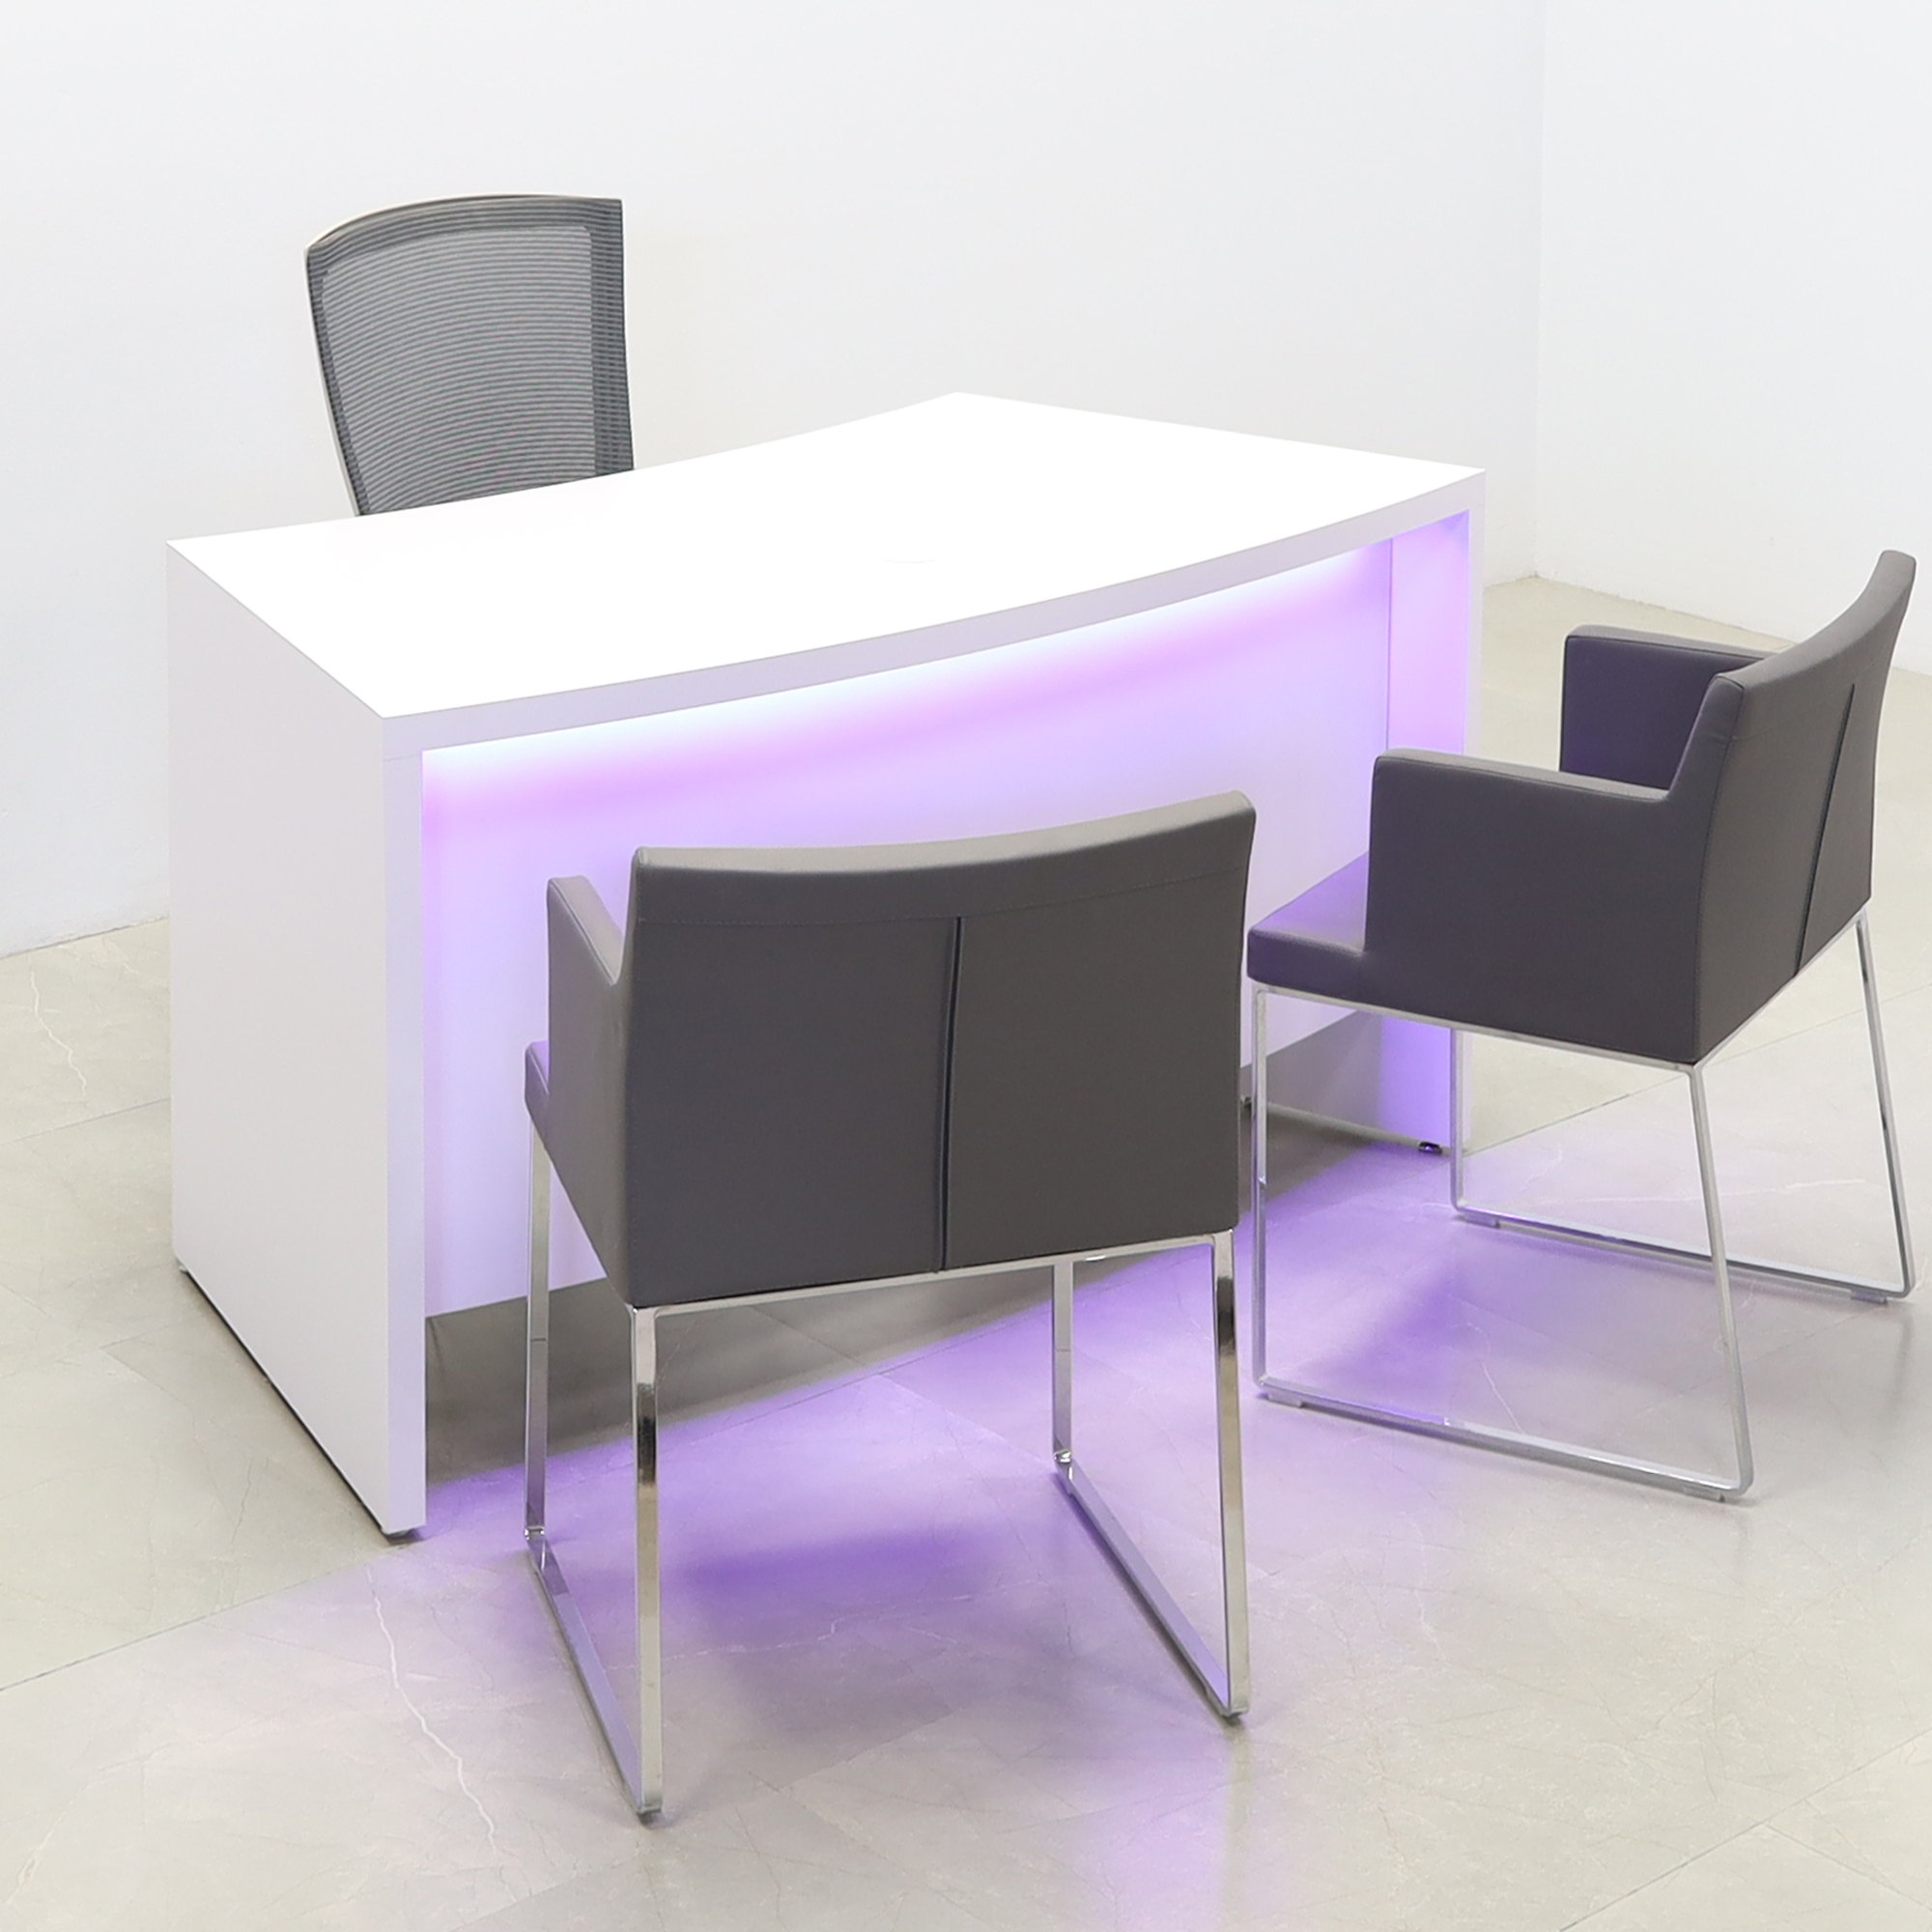 60-inch Seattle Curved Executive Desk in white matte laminate desk and front panel with colored-LED shown here.